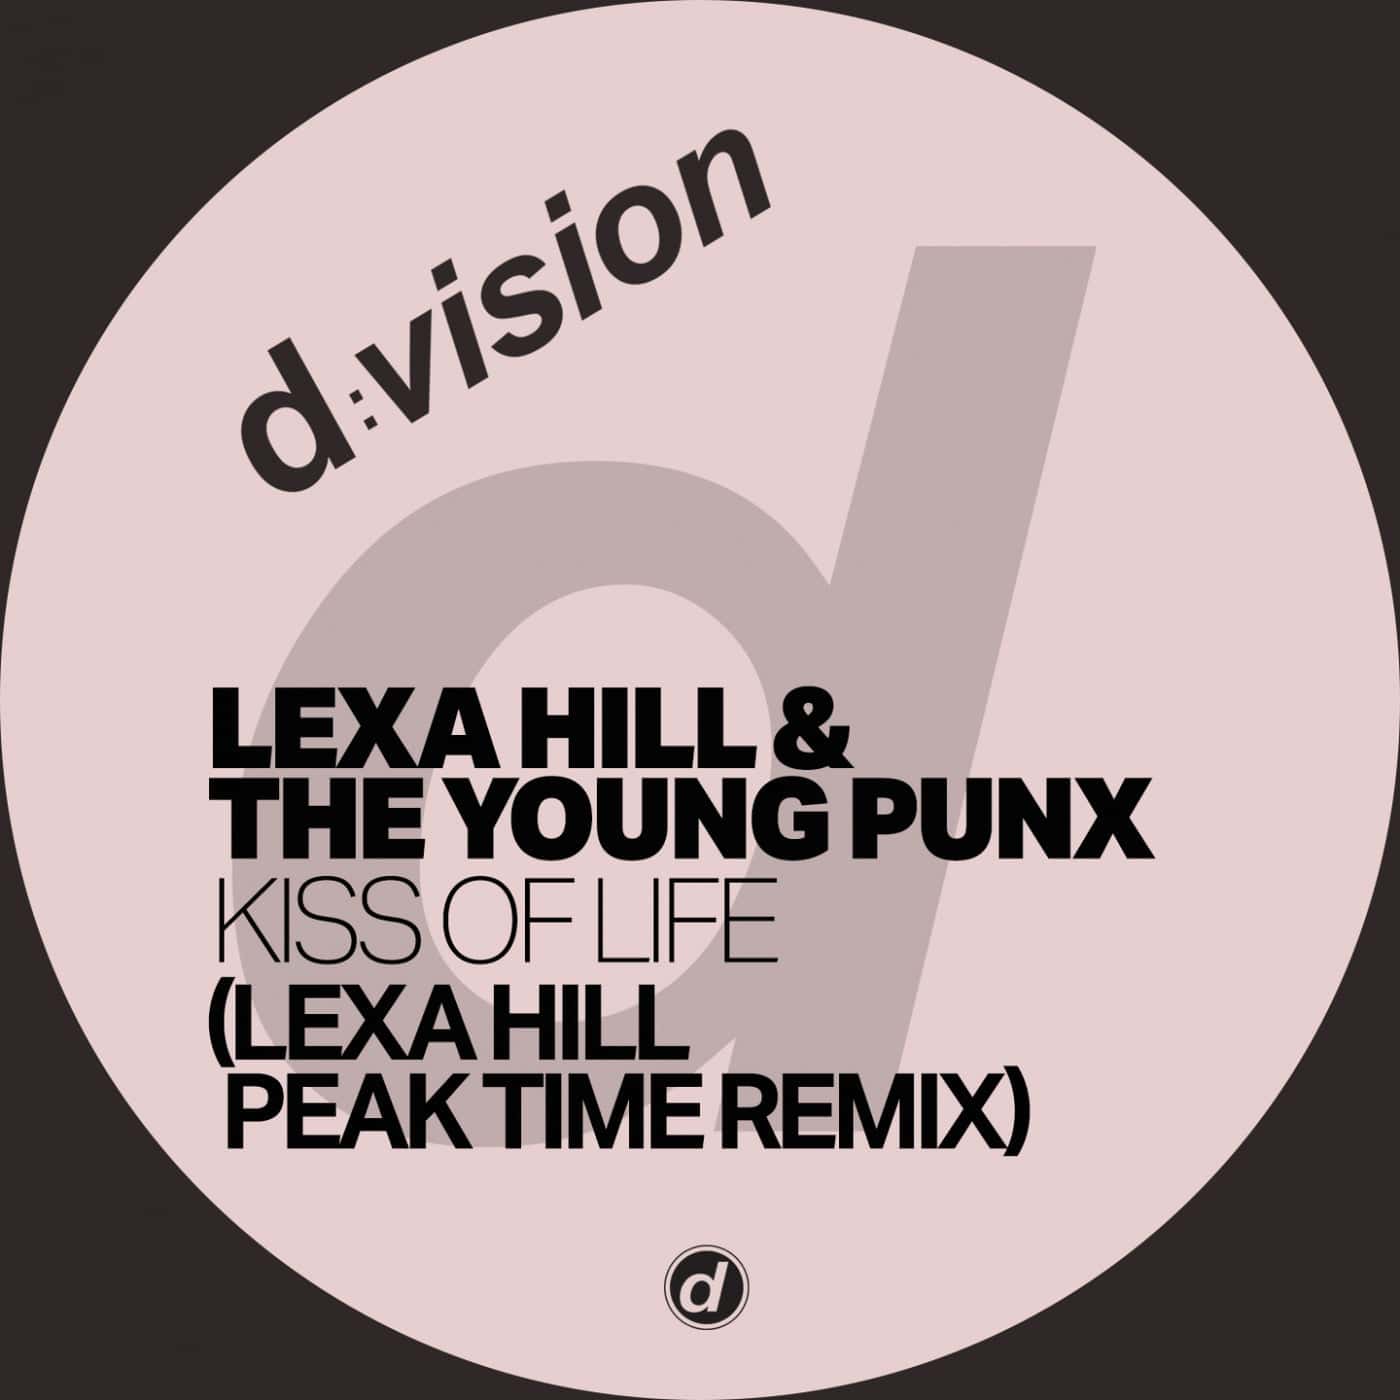 Download The Young Punx, Lexa Hill - Kiss of Life (Lexa Hill Peak Time Remix) on Electrobuzz